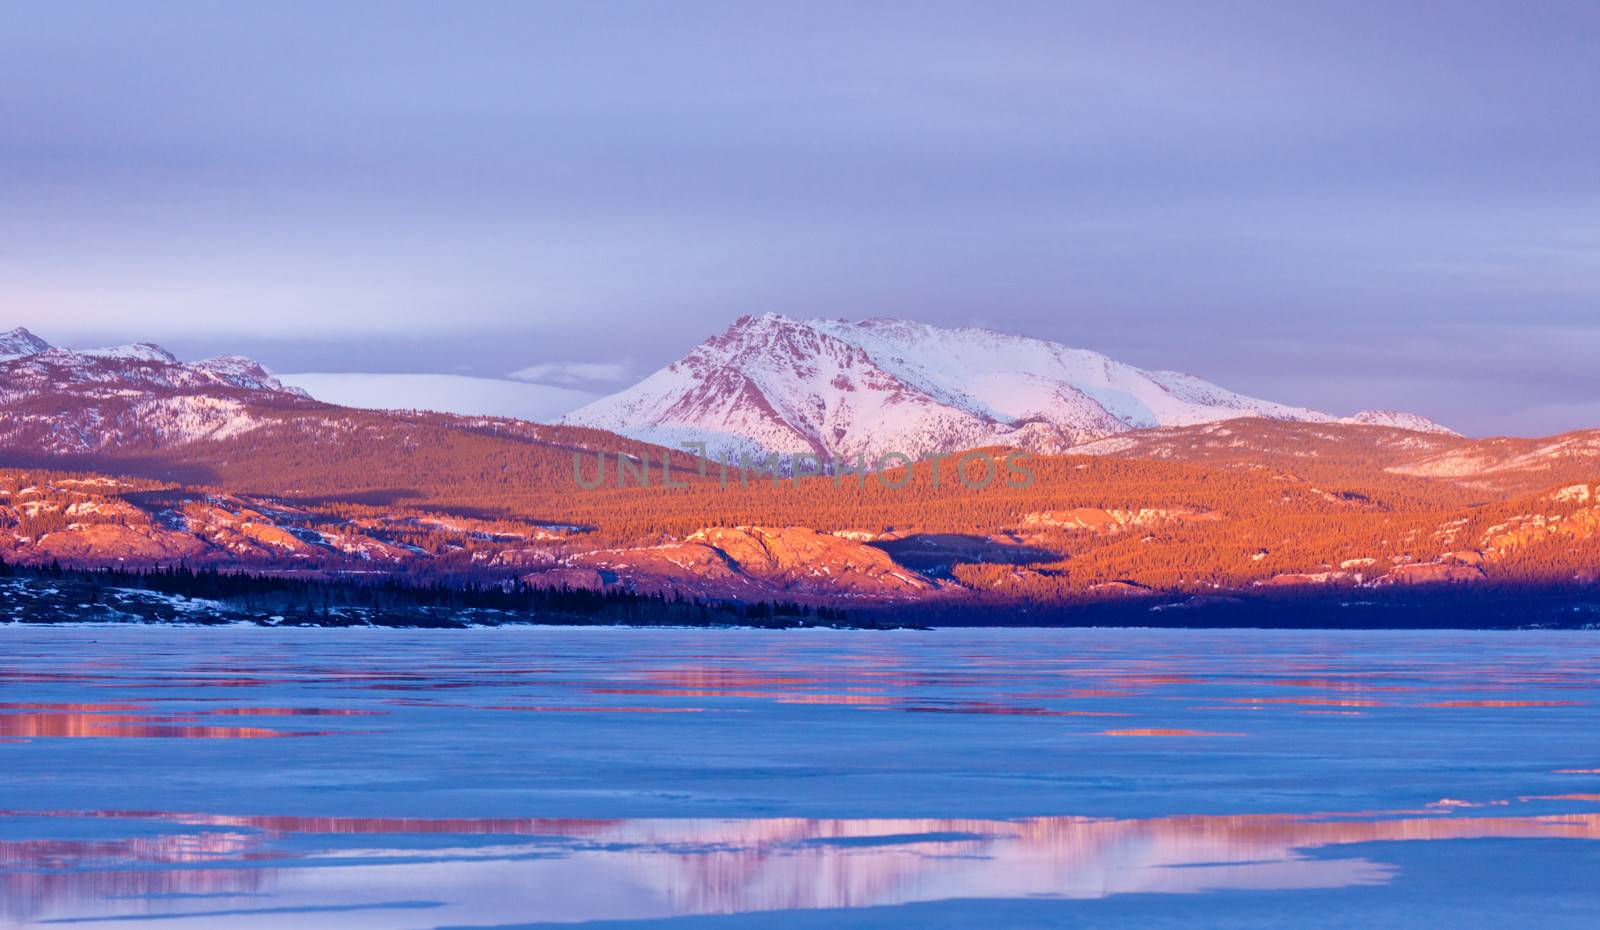 Warm evening light on snow-covered Mount Laurier on the eastern shore of frozen Lake Laberge, Yukon Territory, Canada